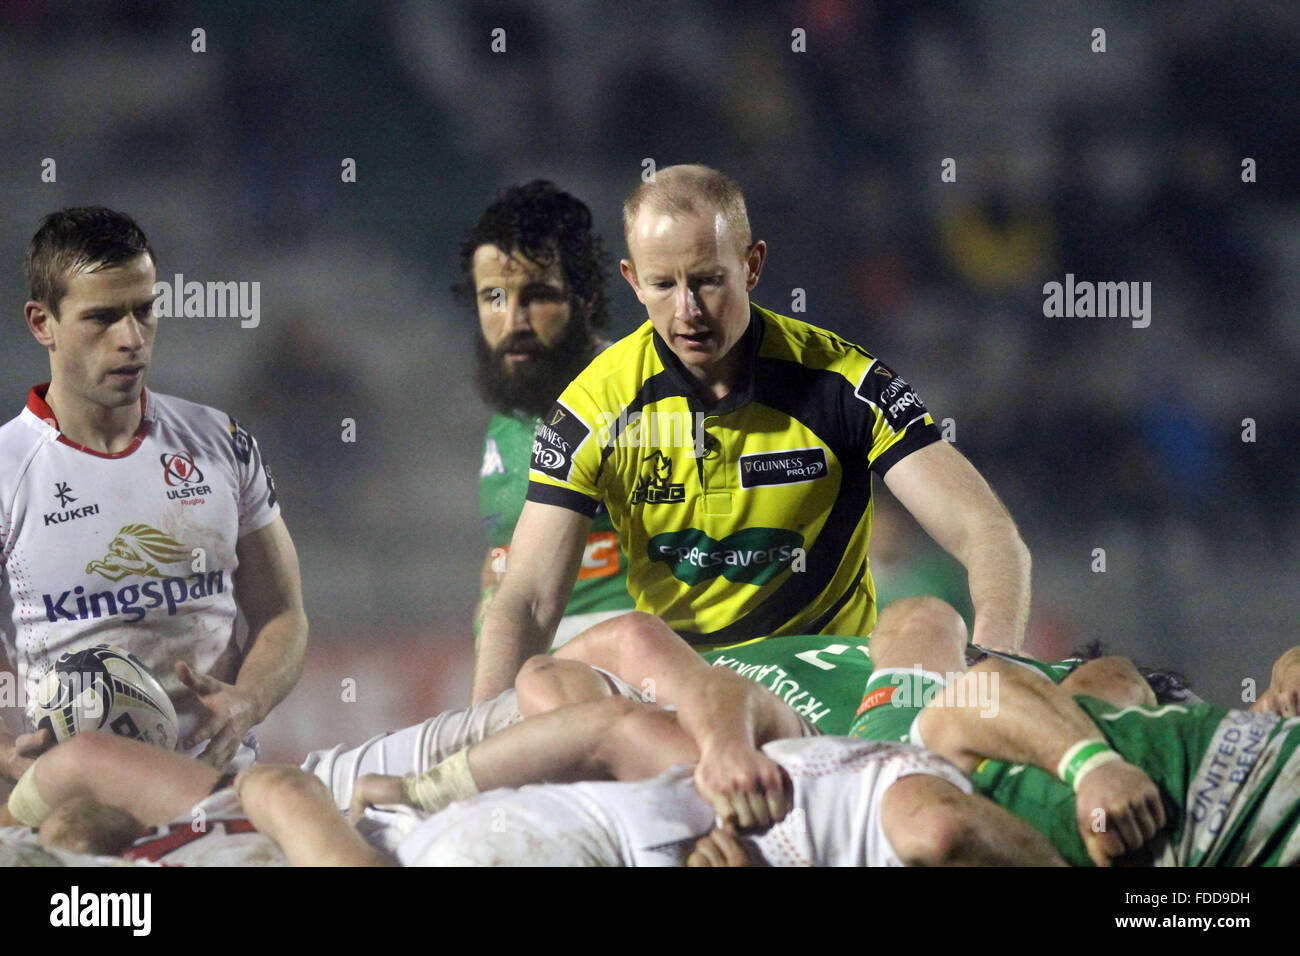 Treviso, Italy. 30th January, 2016. during Rugby Guinness Pro12 match  between Benetton Treviso and Ulster on 30th January, 2016. Credit:  Andrea Spinelli/Alamy Live News Stock Photo